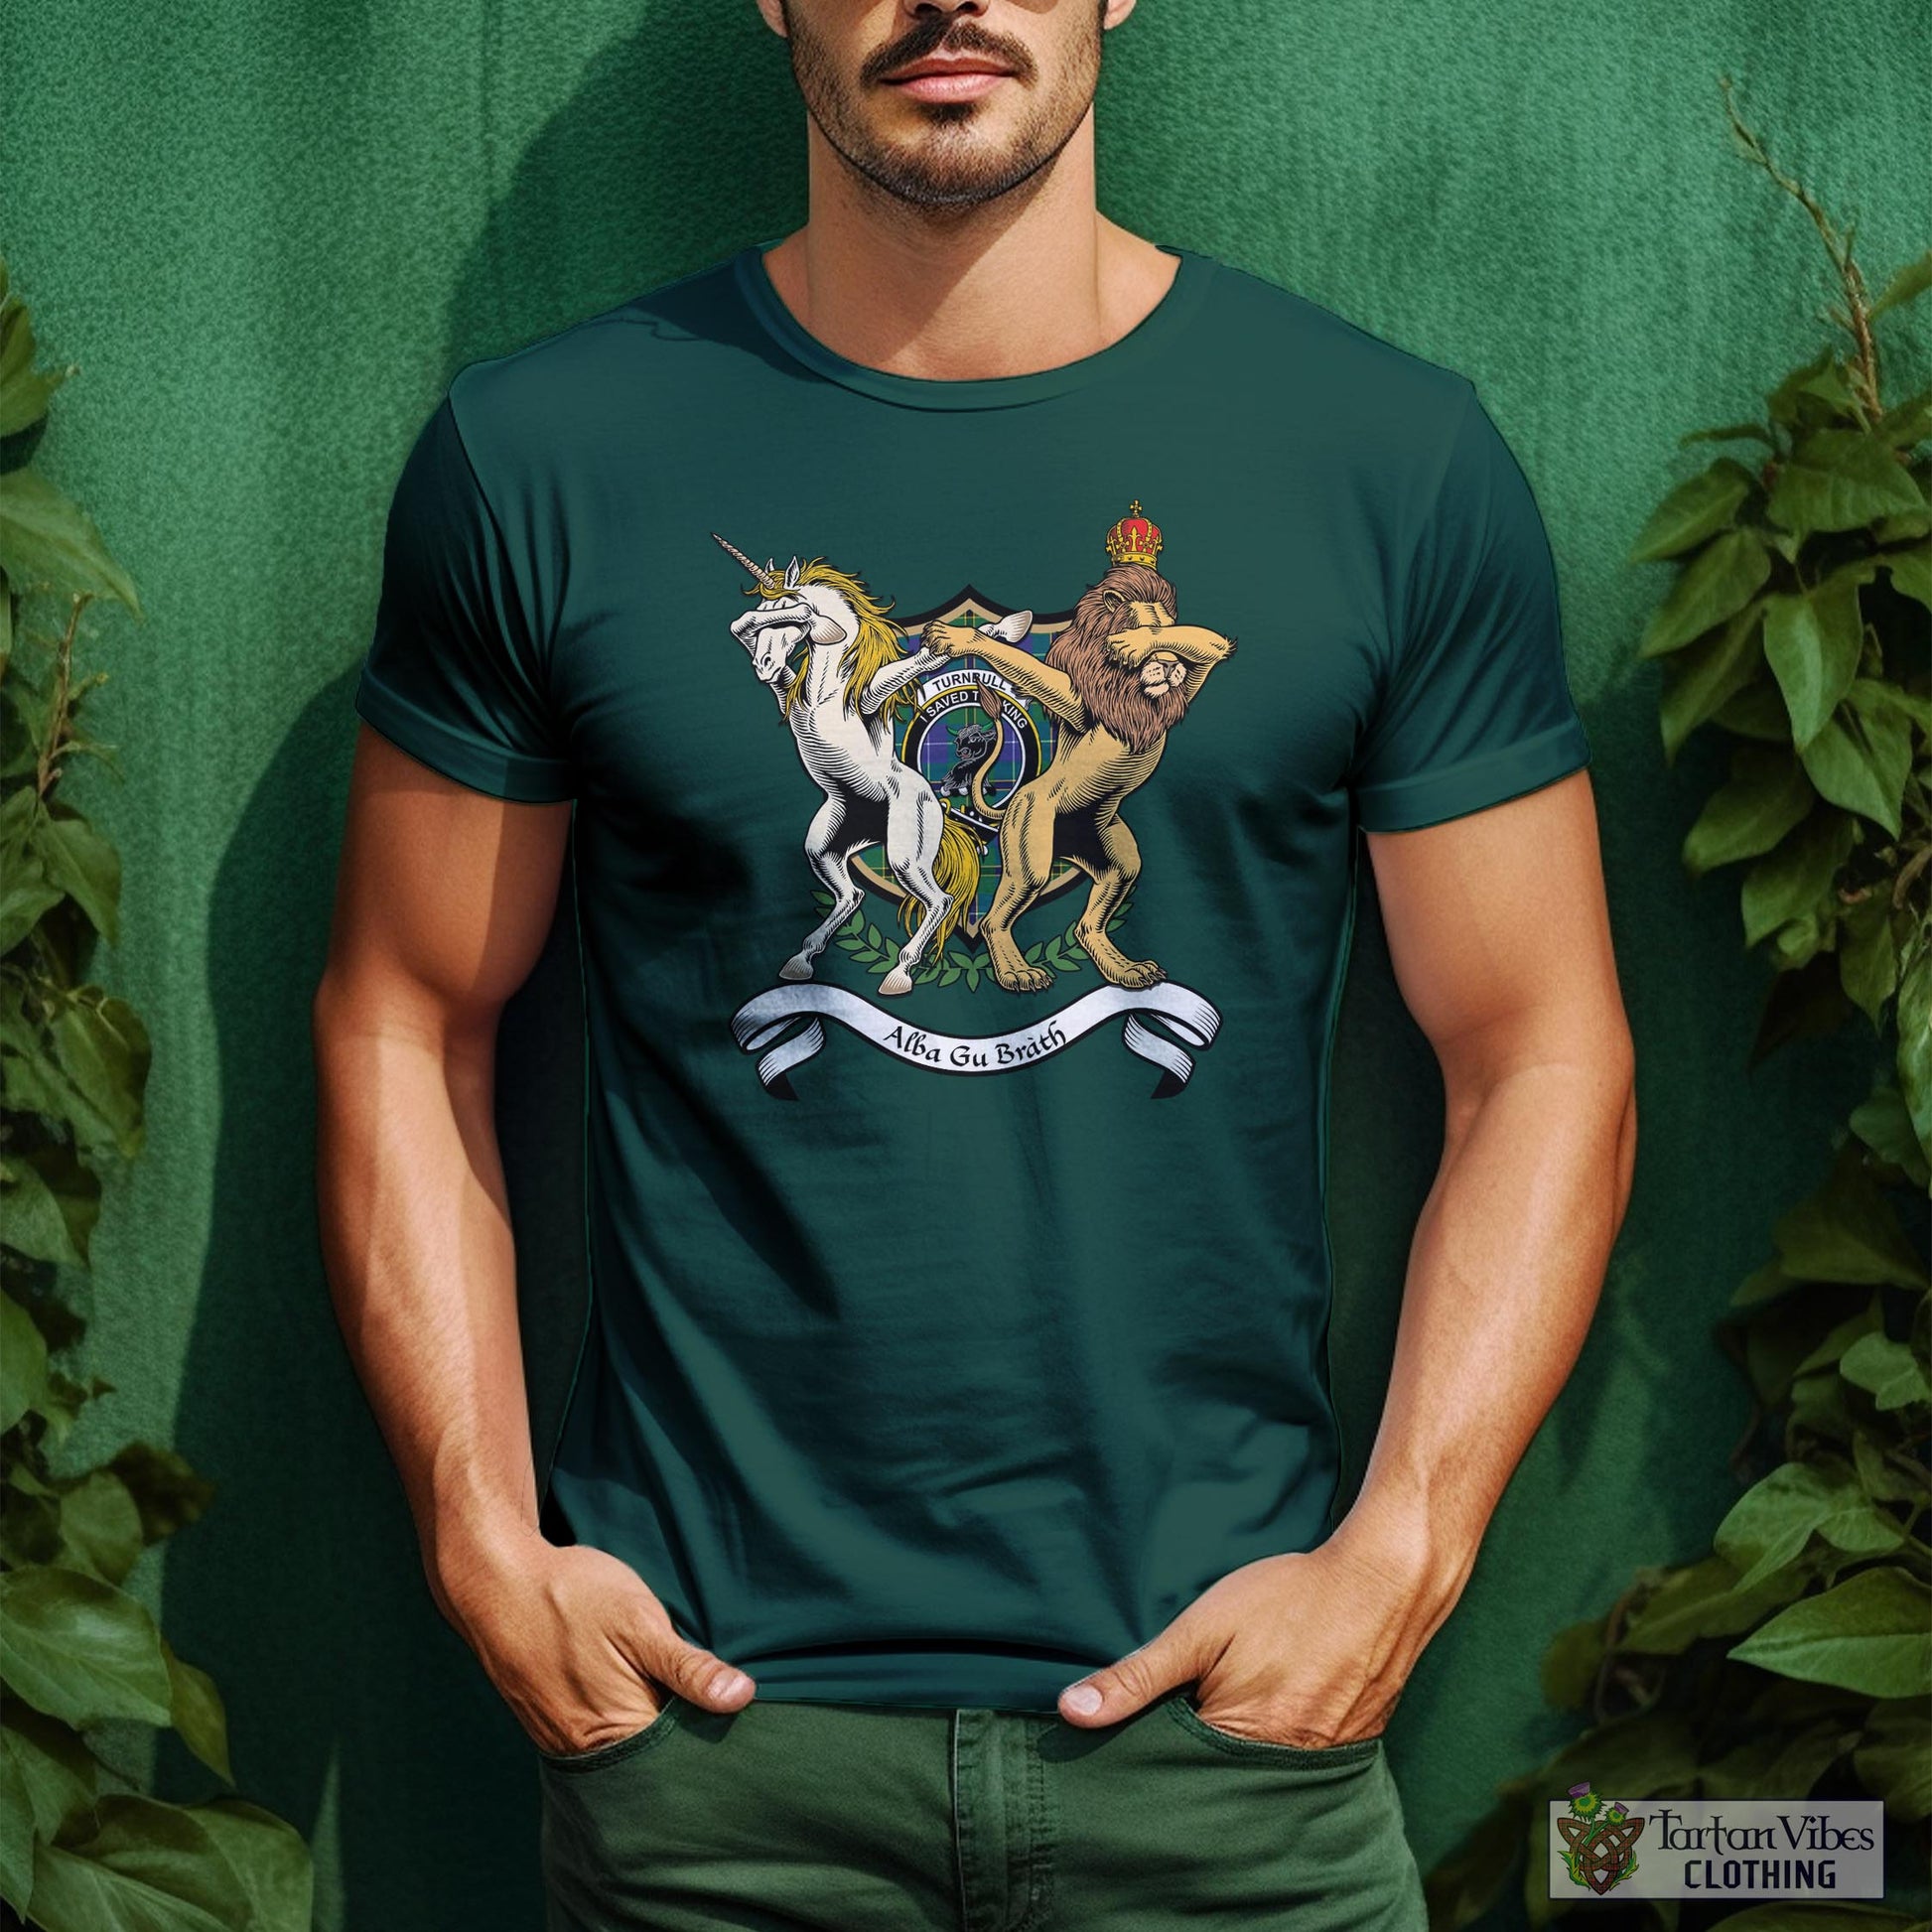 Tartan Vibes Clothing Turnbull Hunting Family Crest Cotton Men's T-Shirt with Scotland Royal Coat Of Arm Funny Style